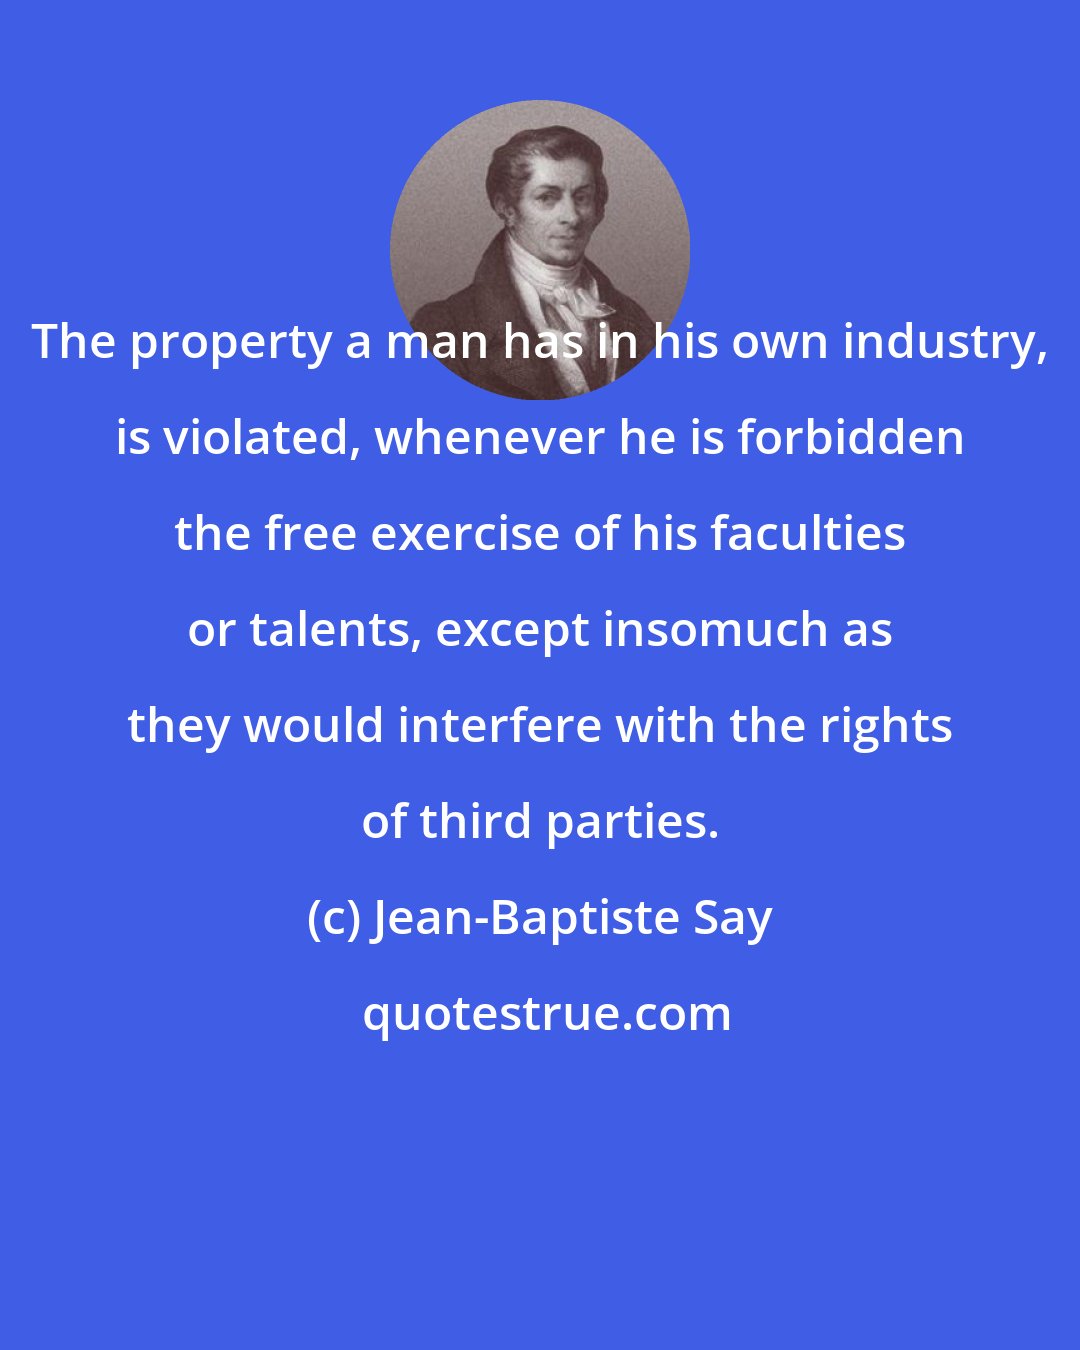 Jean-Baptiste Say: The property a man has in his own industry, is violated, whenever he is forbidden the free exercise of his faculties or talents, except insomuch as they would interfere with the rights of third parties.